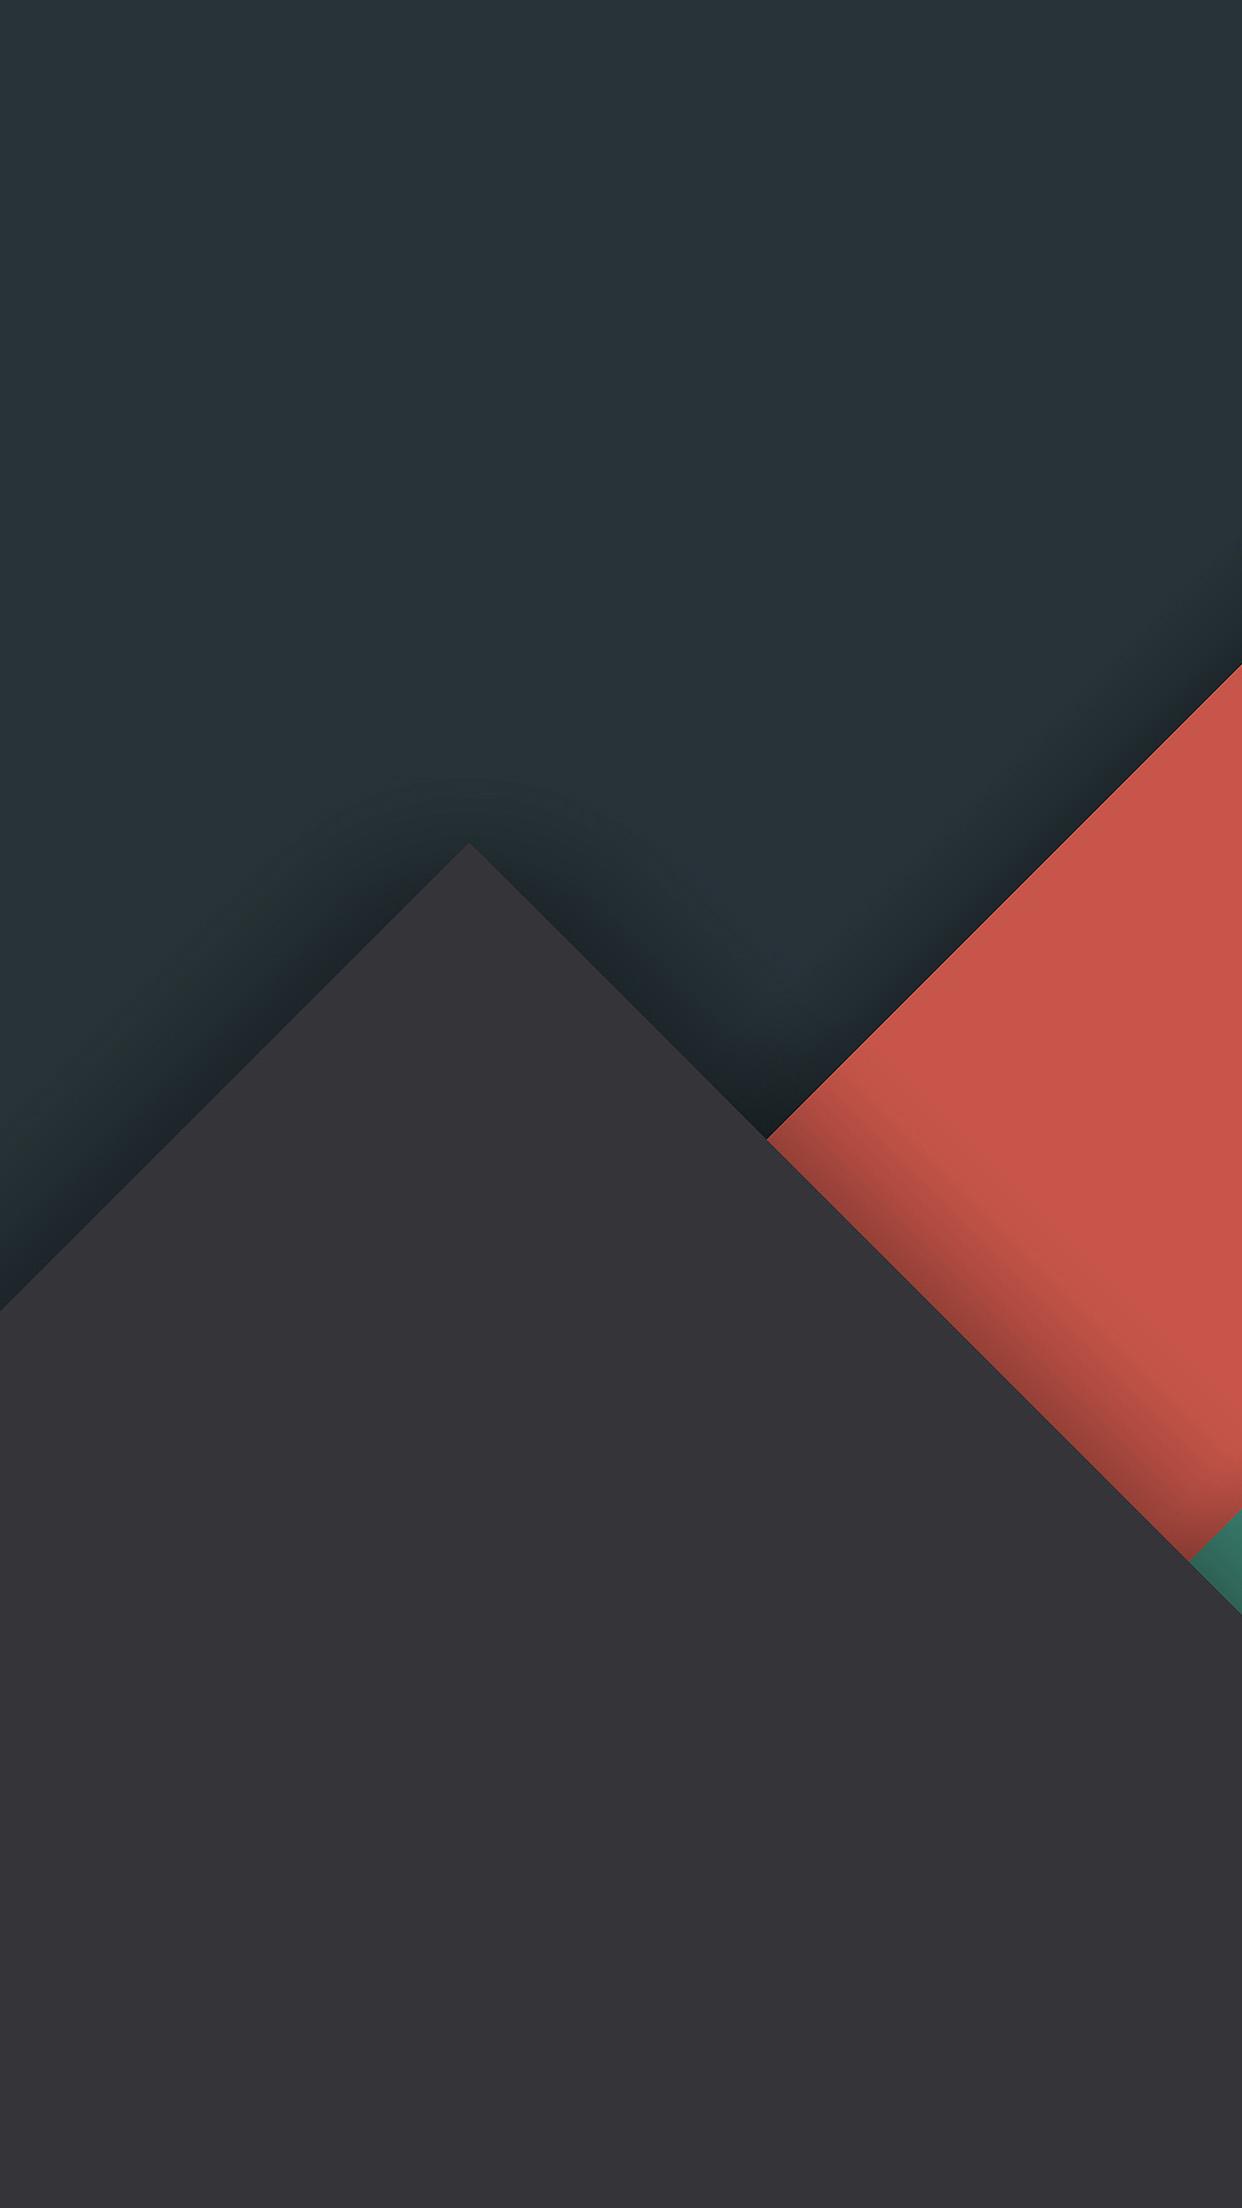 Geometric wallpaper for iPhone and iPad